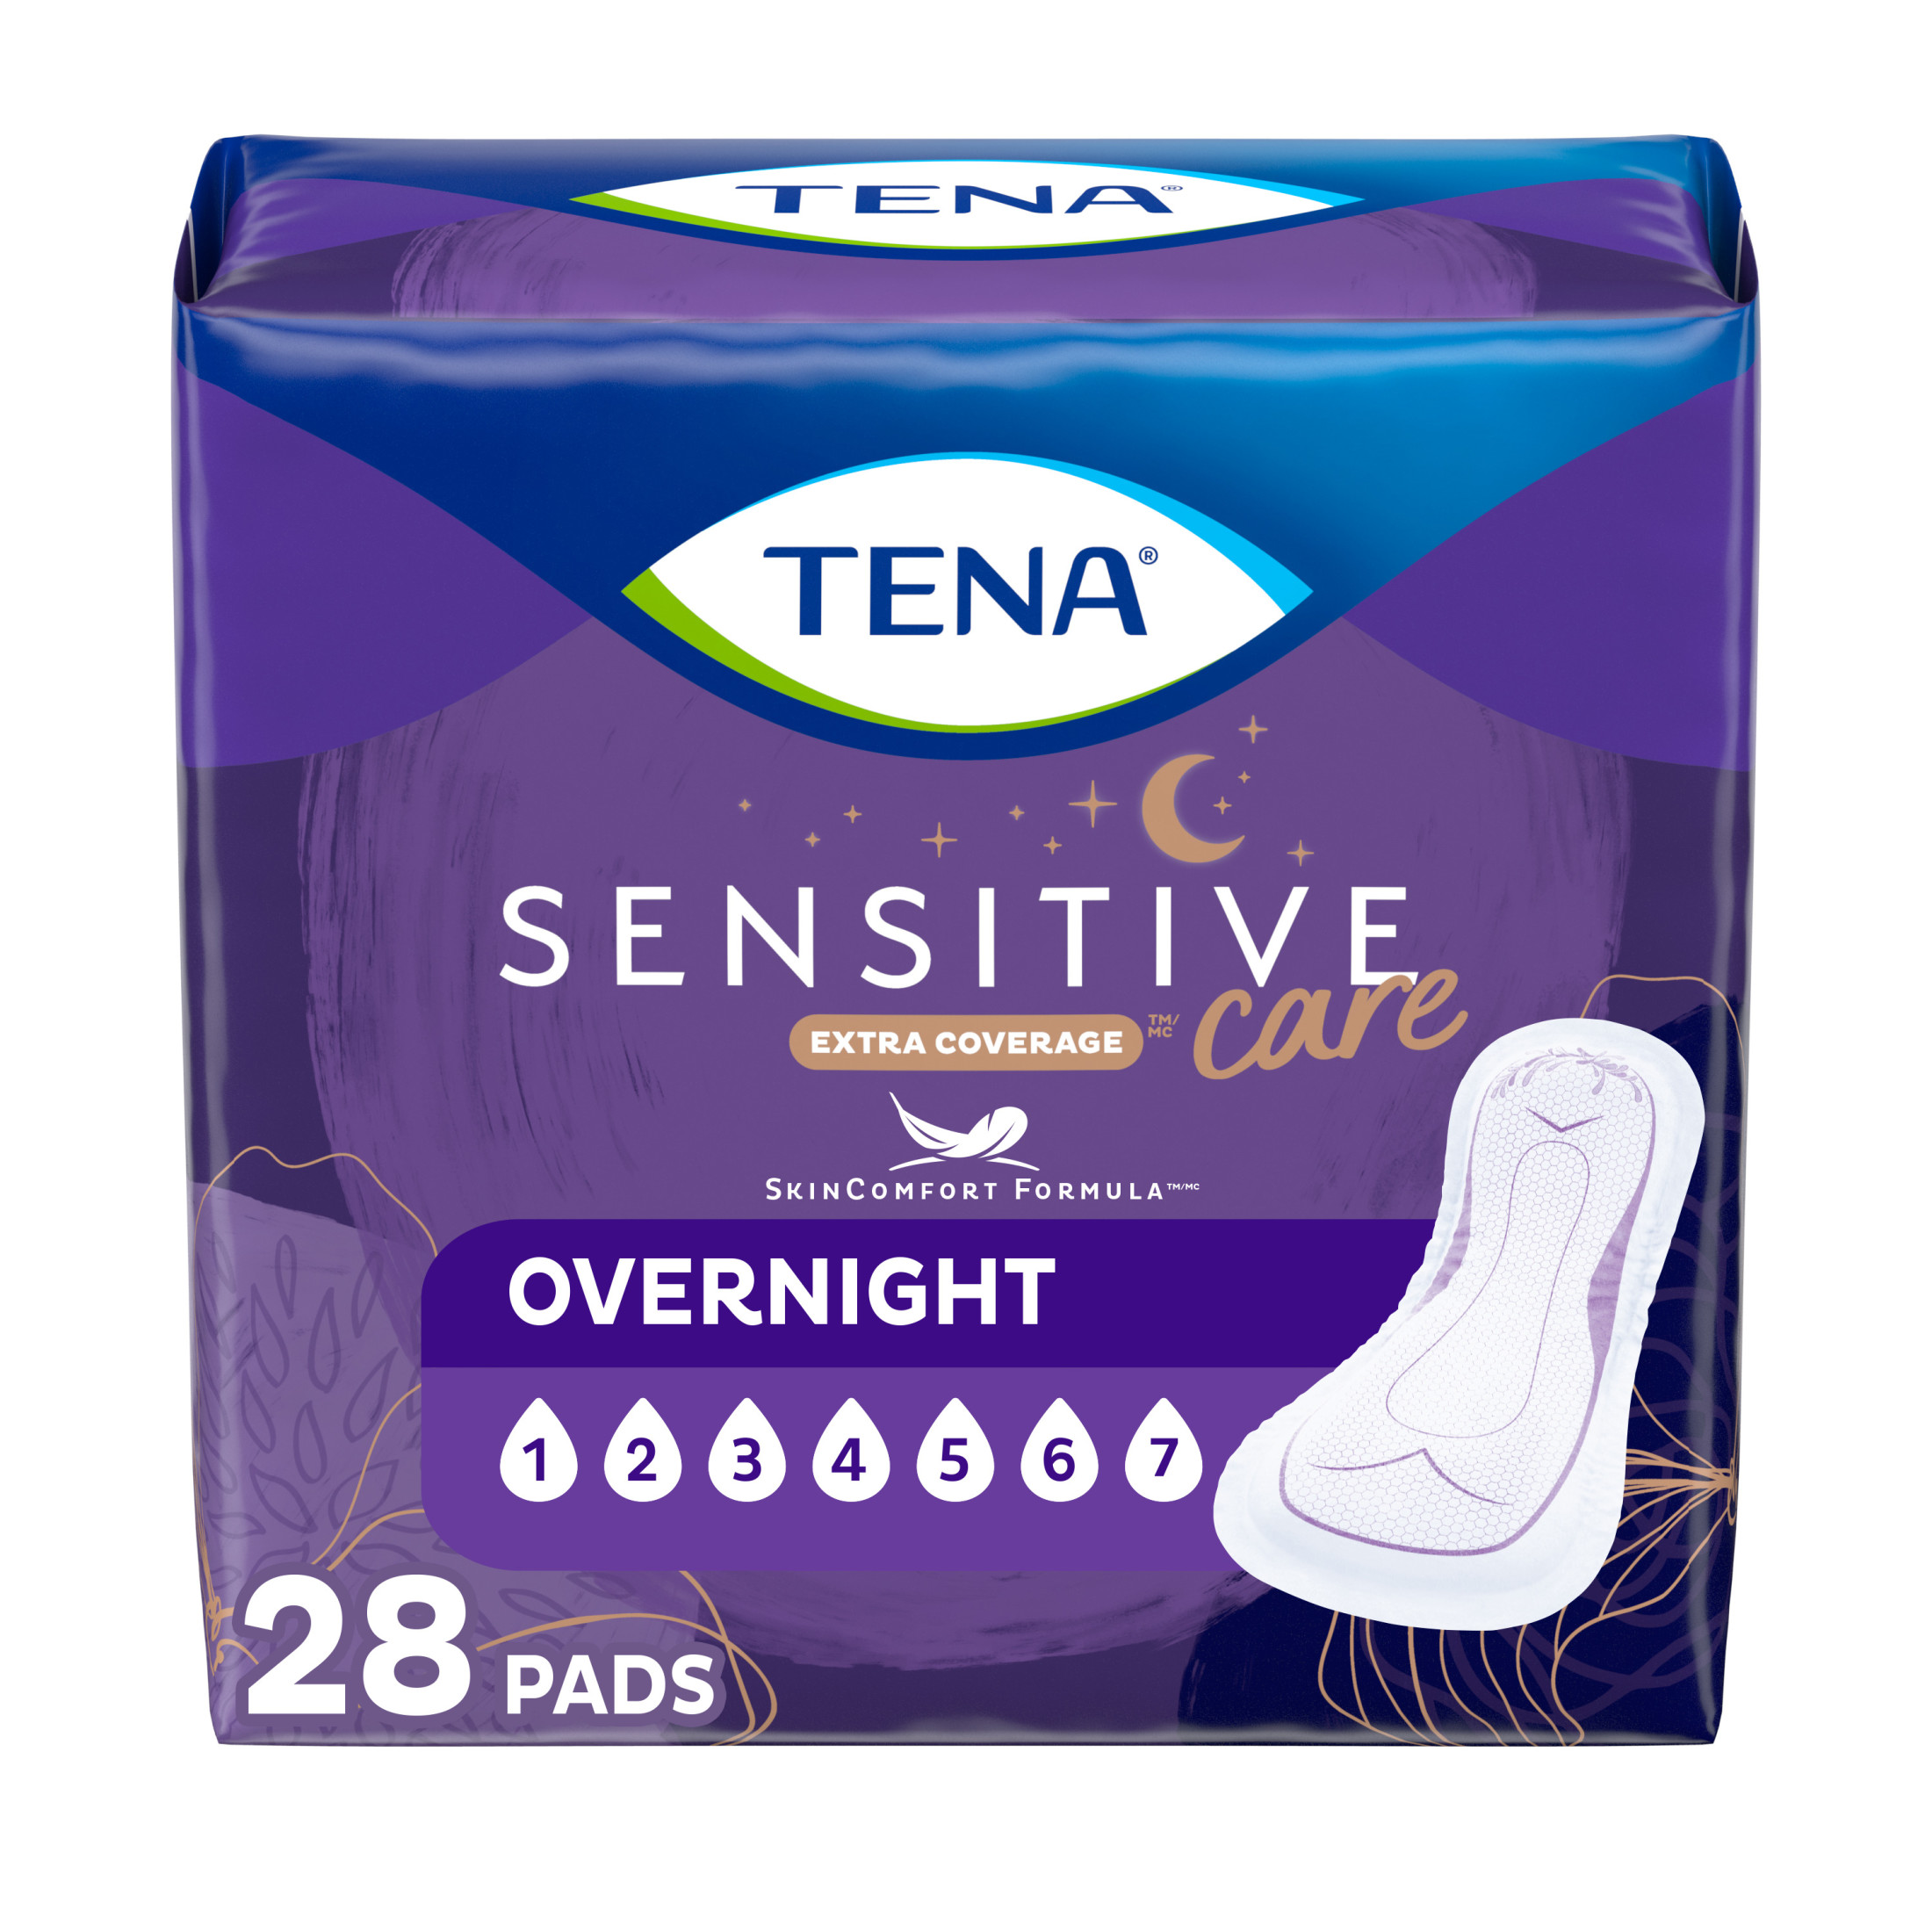 Tena Incontinence Pads, Bladder Control & Postpartum for Women, Overnight Absorbency, Sensitive Care, 28 Count - image 1 of 7